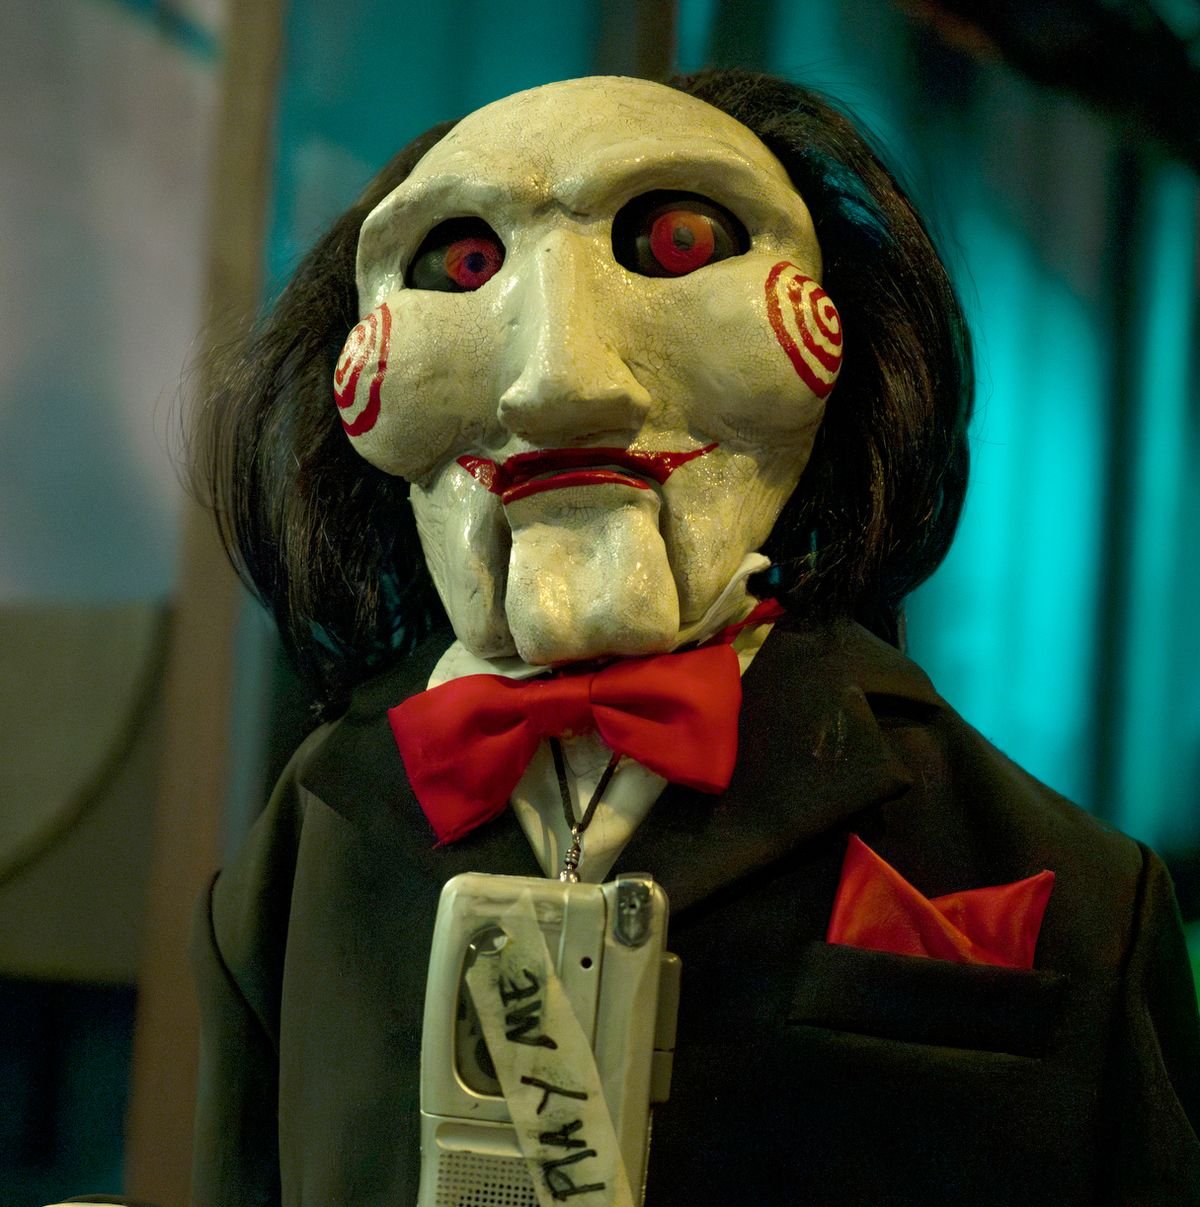 Revenge is served with heart and gore in “Saw X” — The Hofstra Chronicle